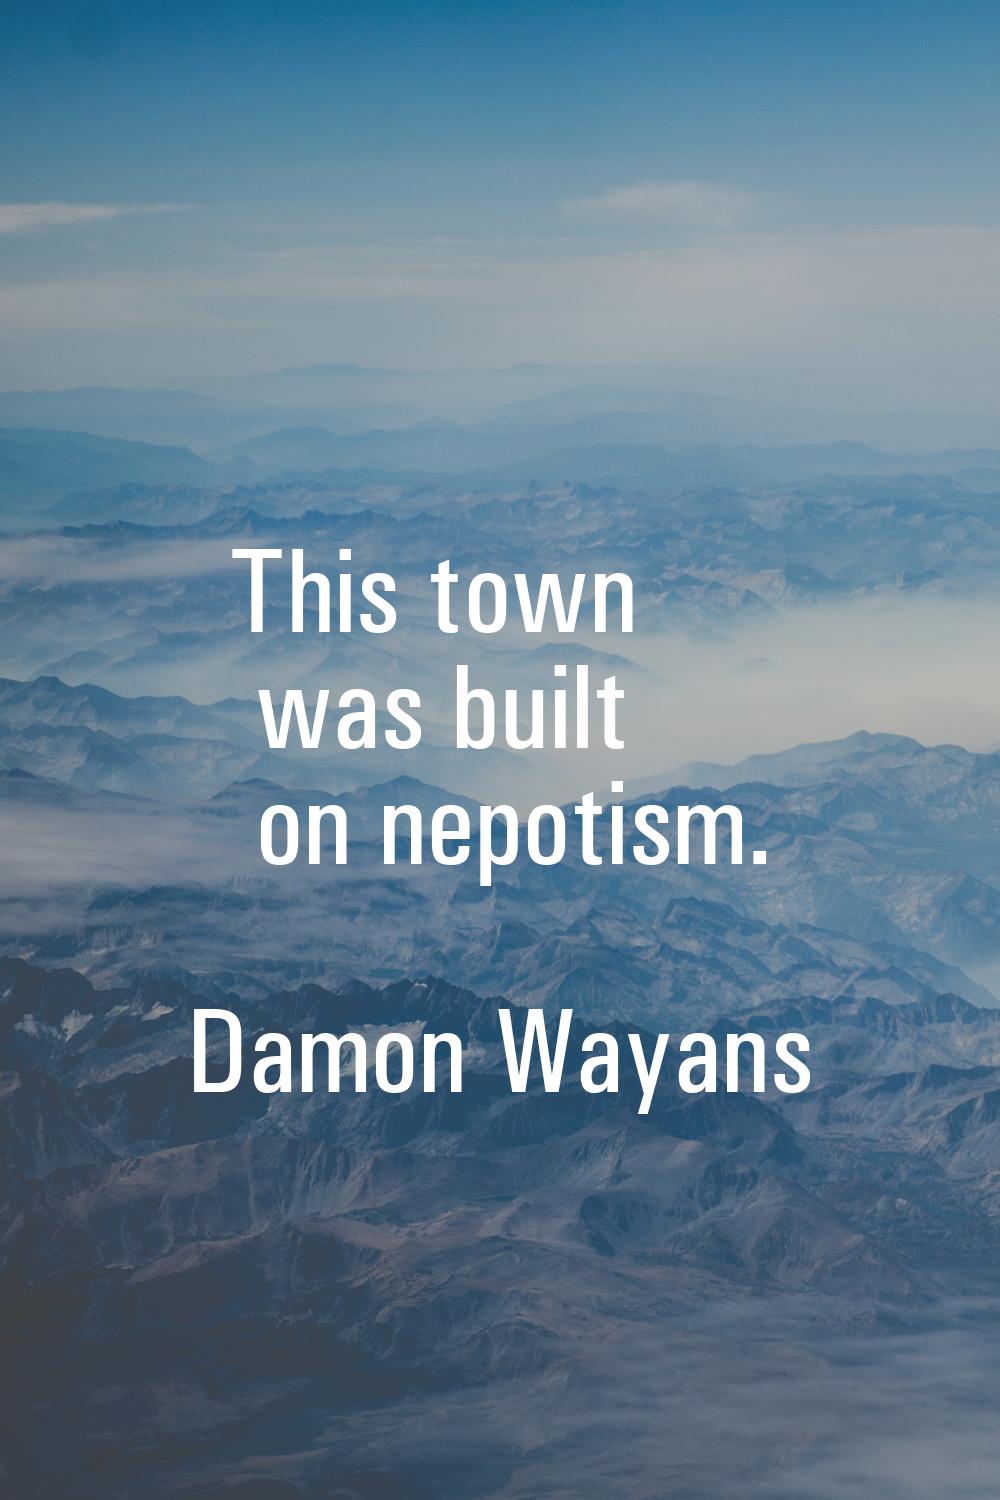 This town was built on nepotism.